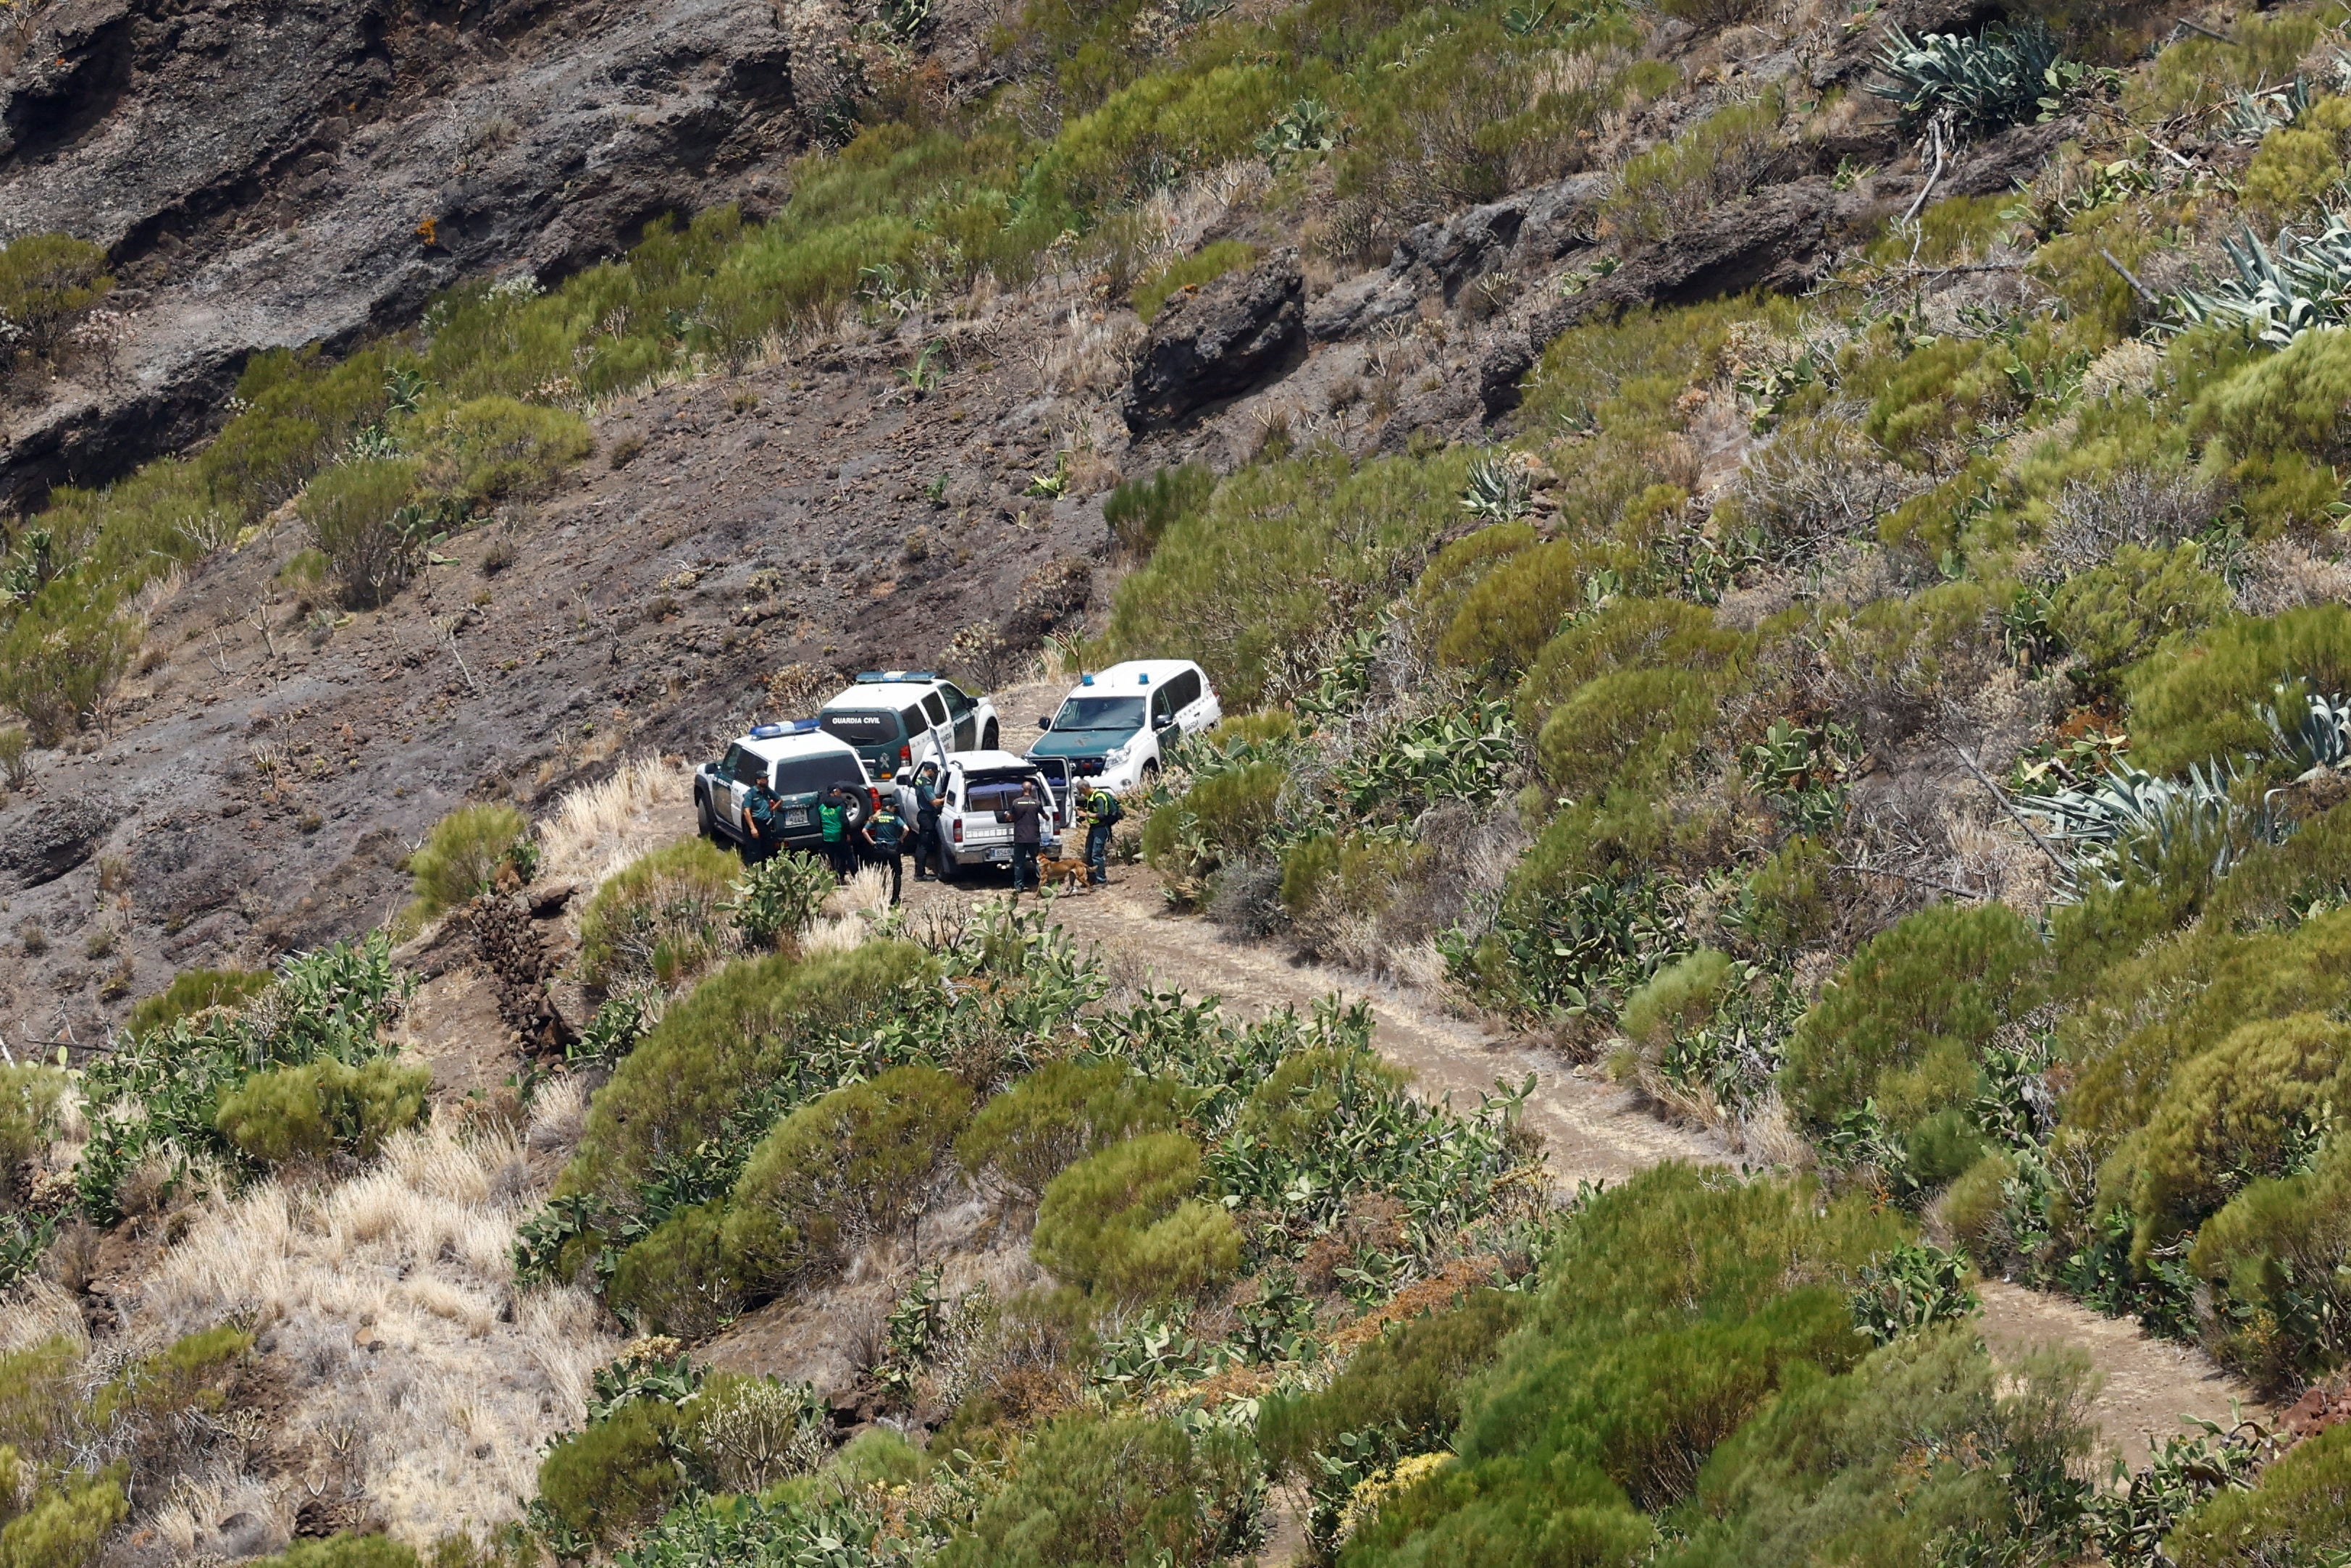 guardia civil, emergency workers, tenerife, missing person, on the ground with the desperate search for missing jay slater in tenerife